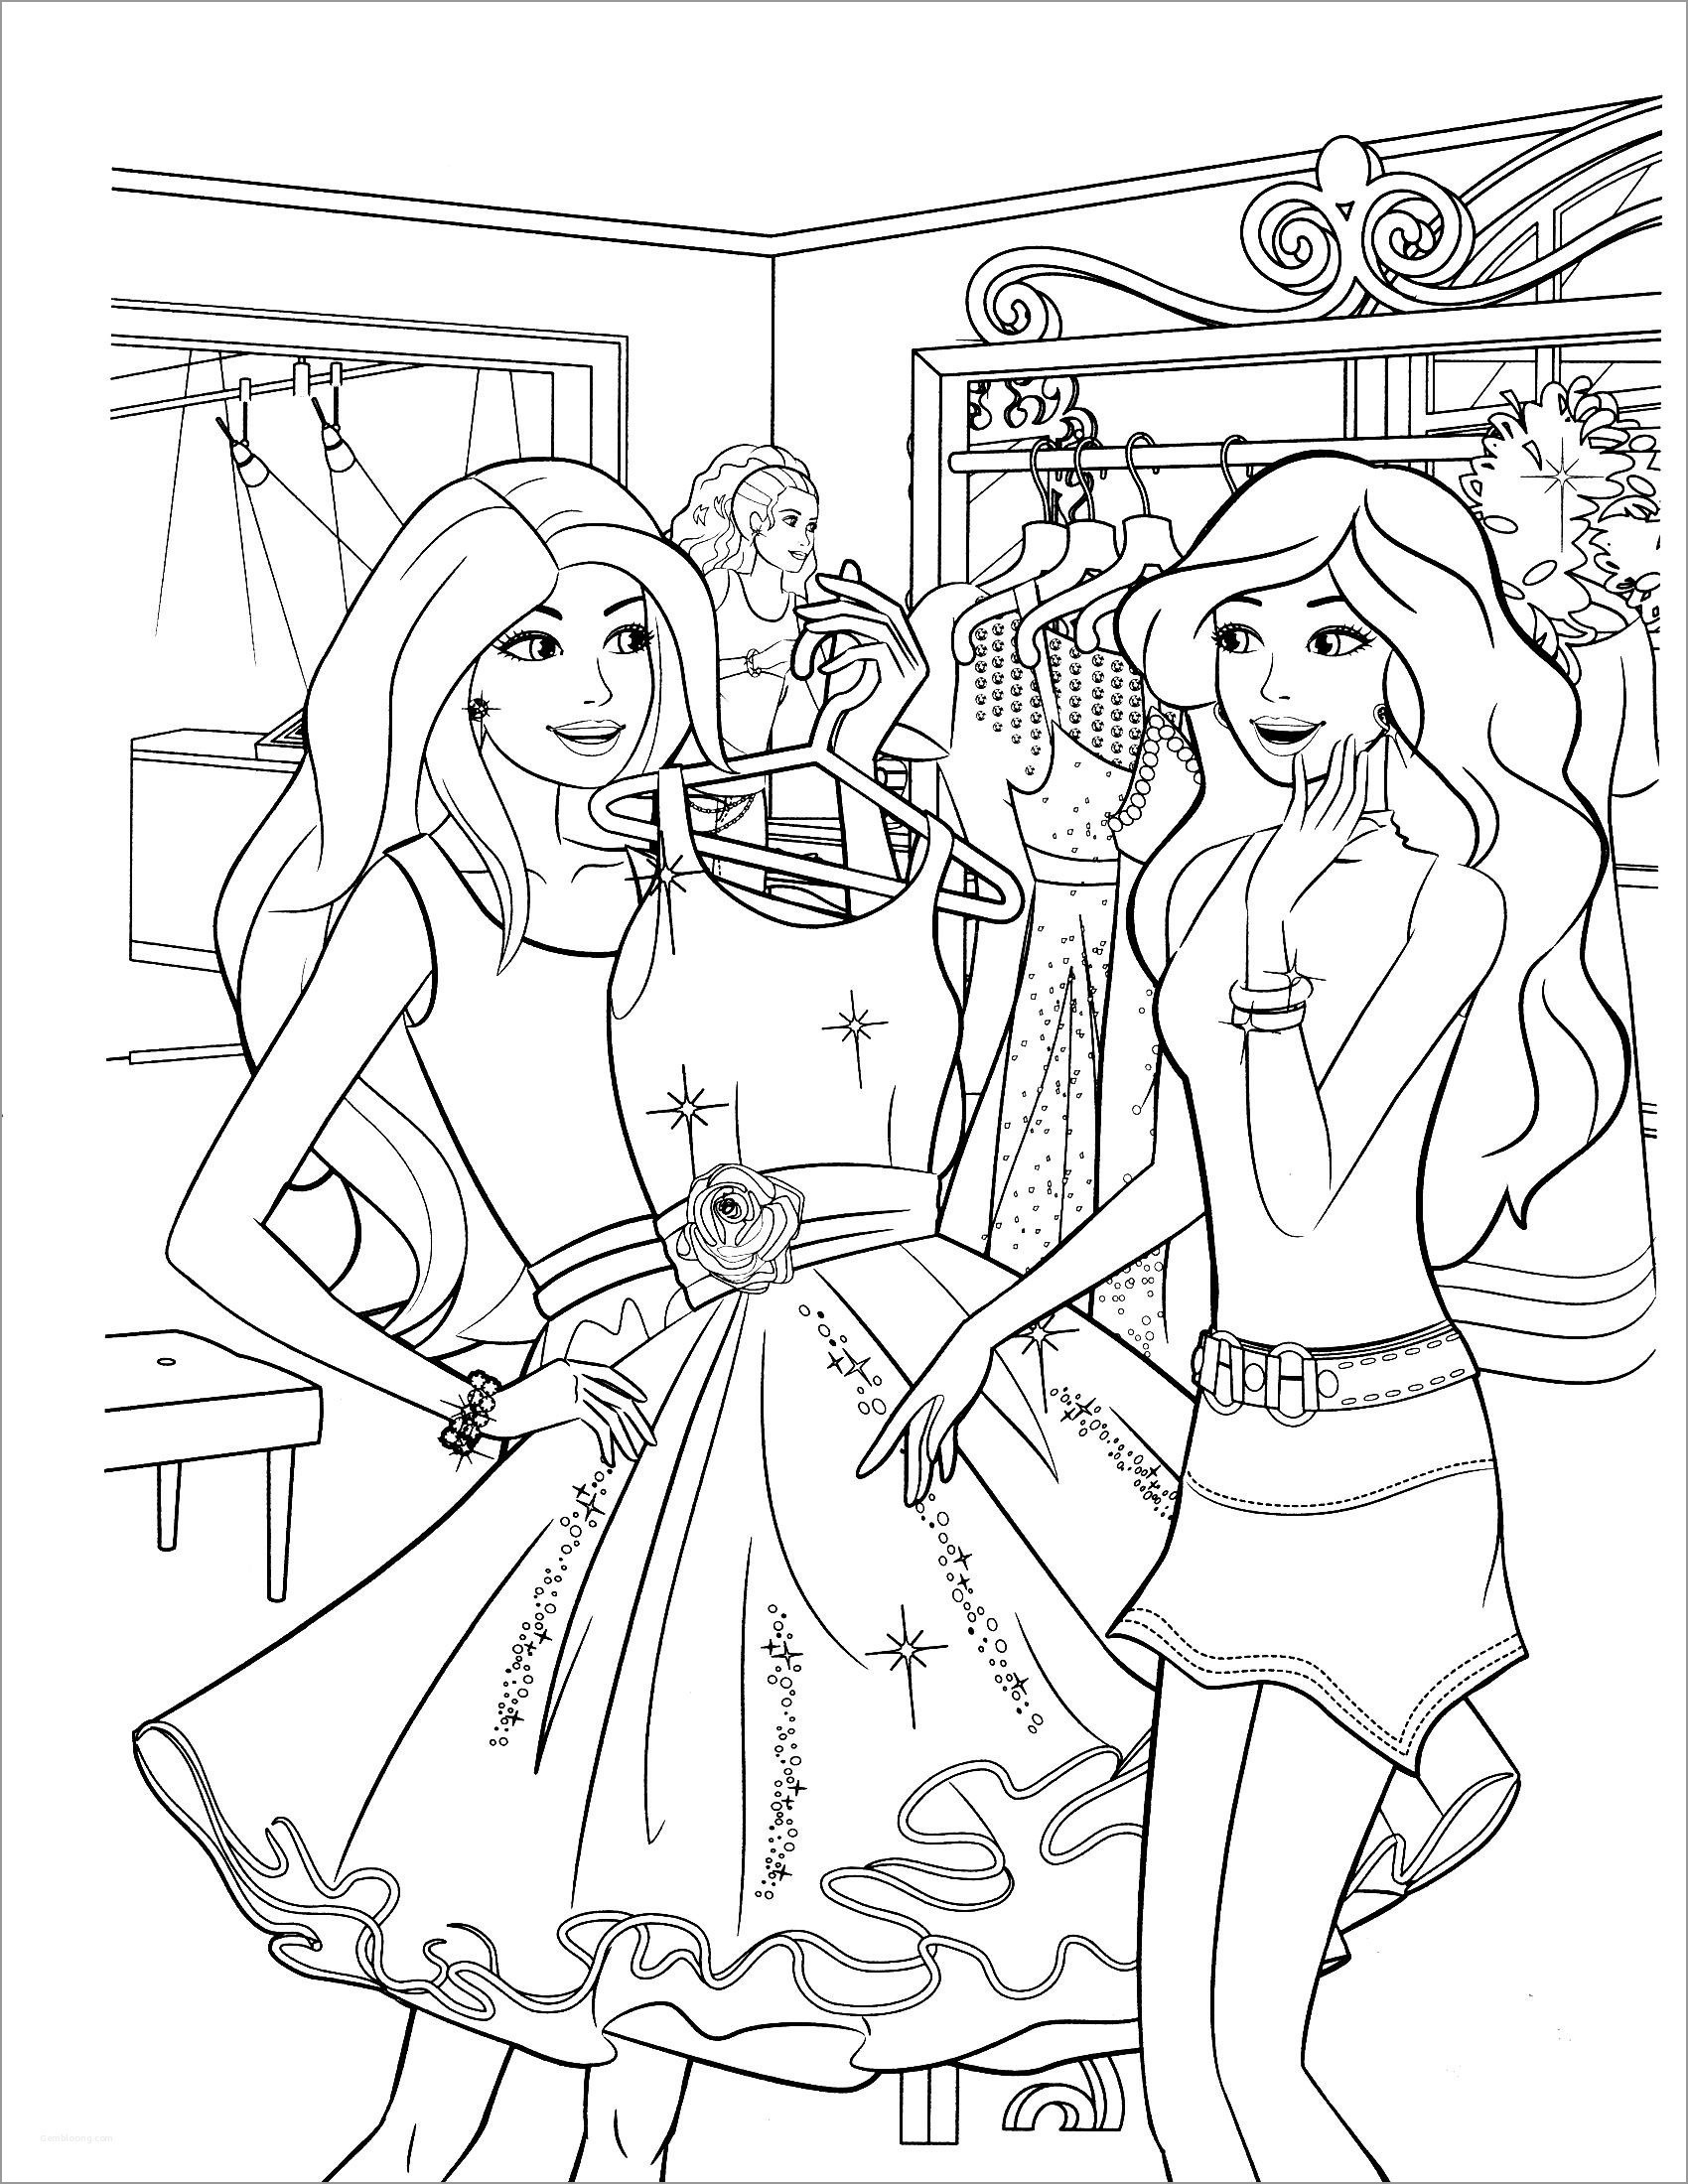 Barbie at the Store Coloring Page